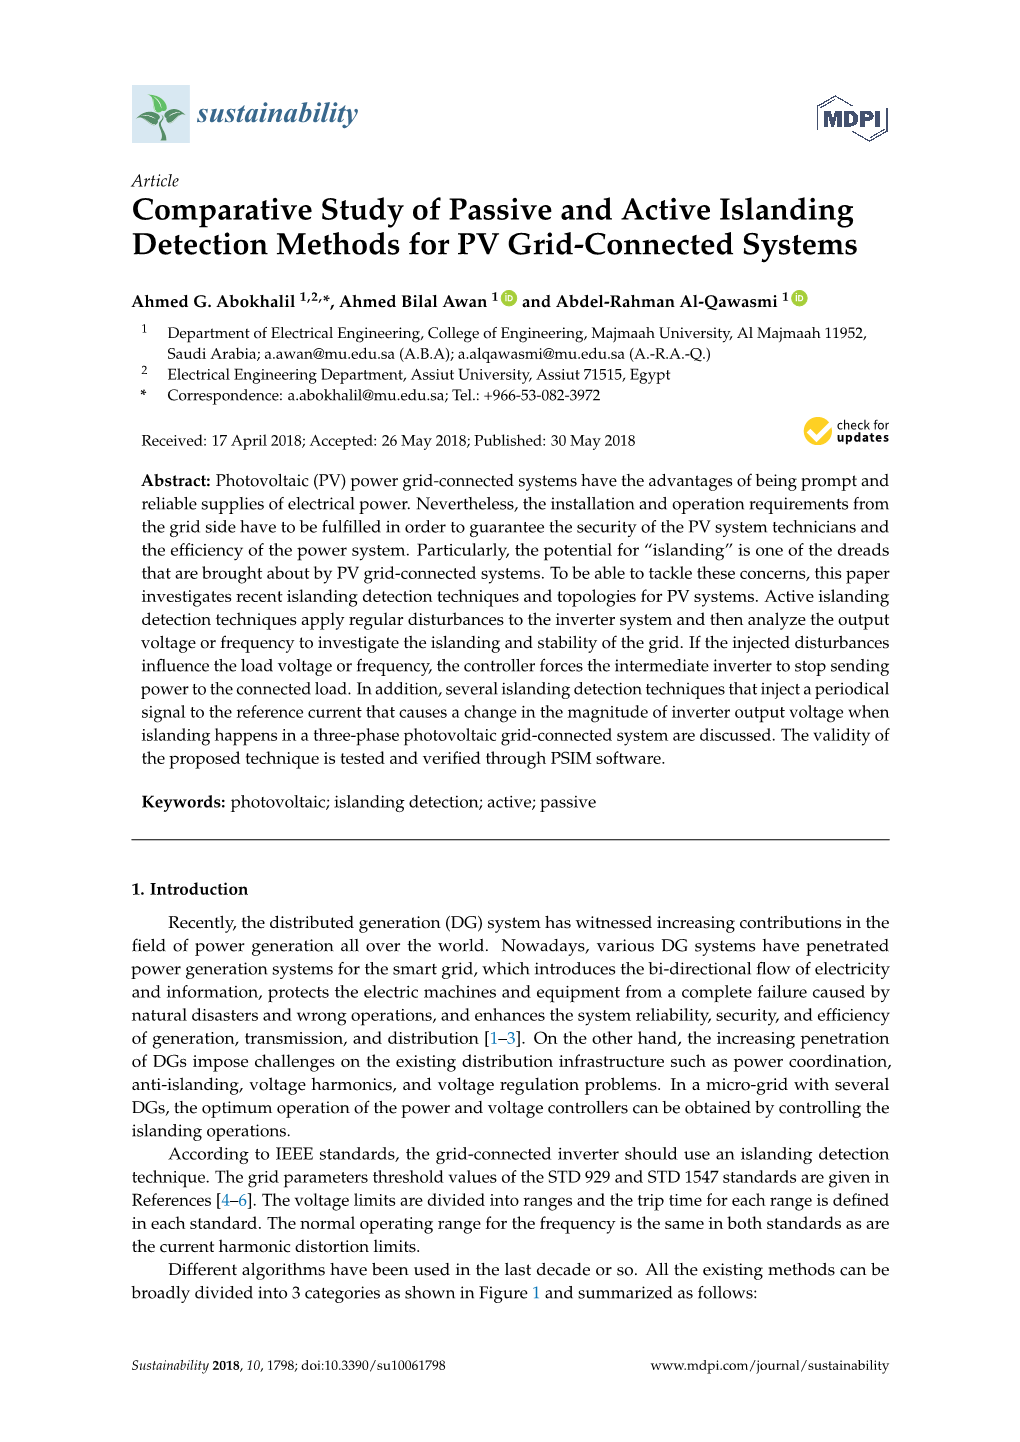 Comparative Study of Passive and Active Islanding Detection Methods for PV Grid-Connected Systems